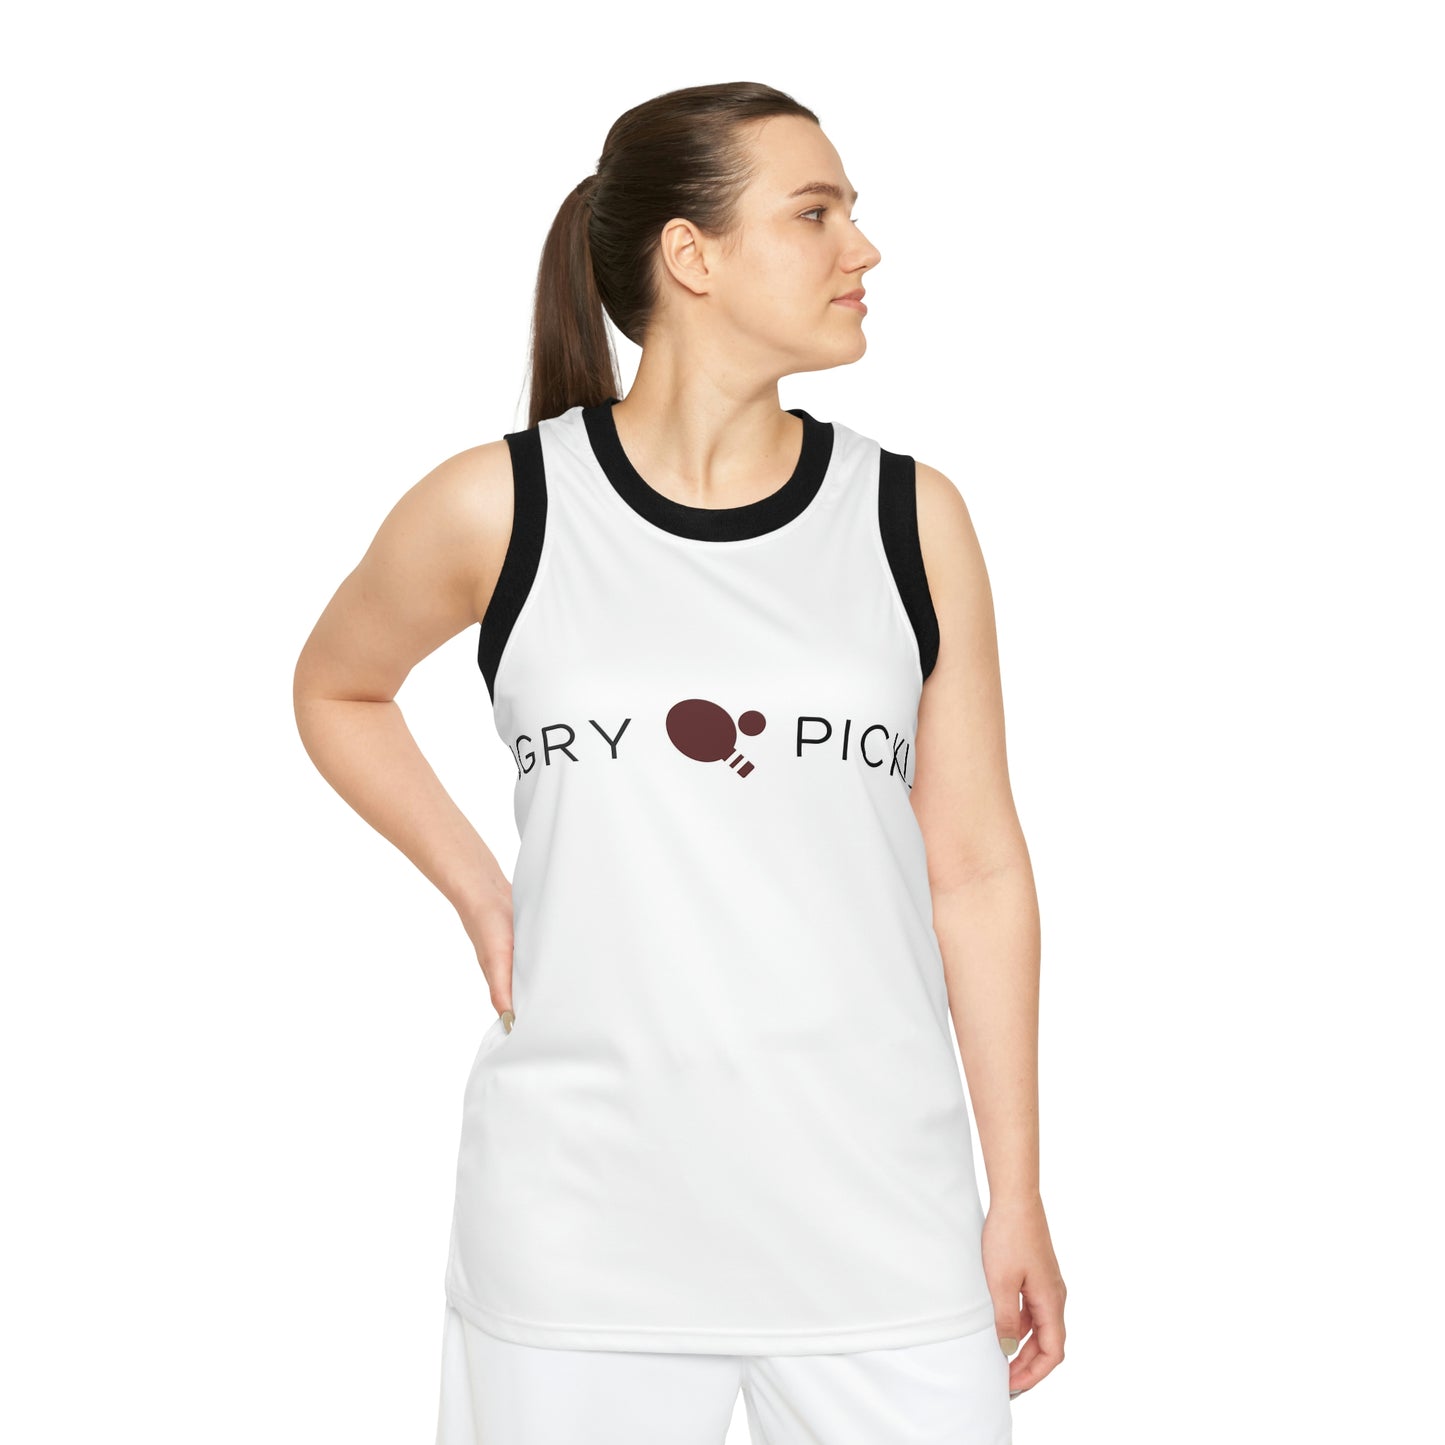 Angry Pickle Unisex Singlet